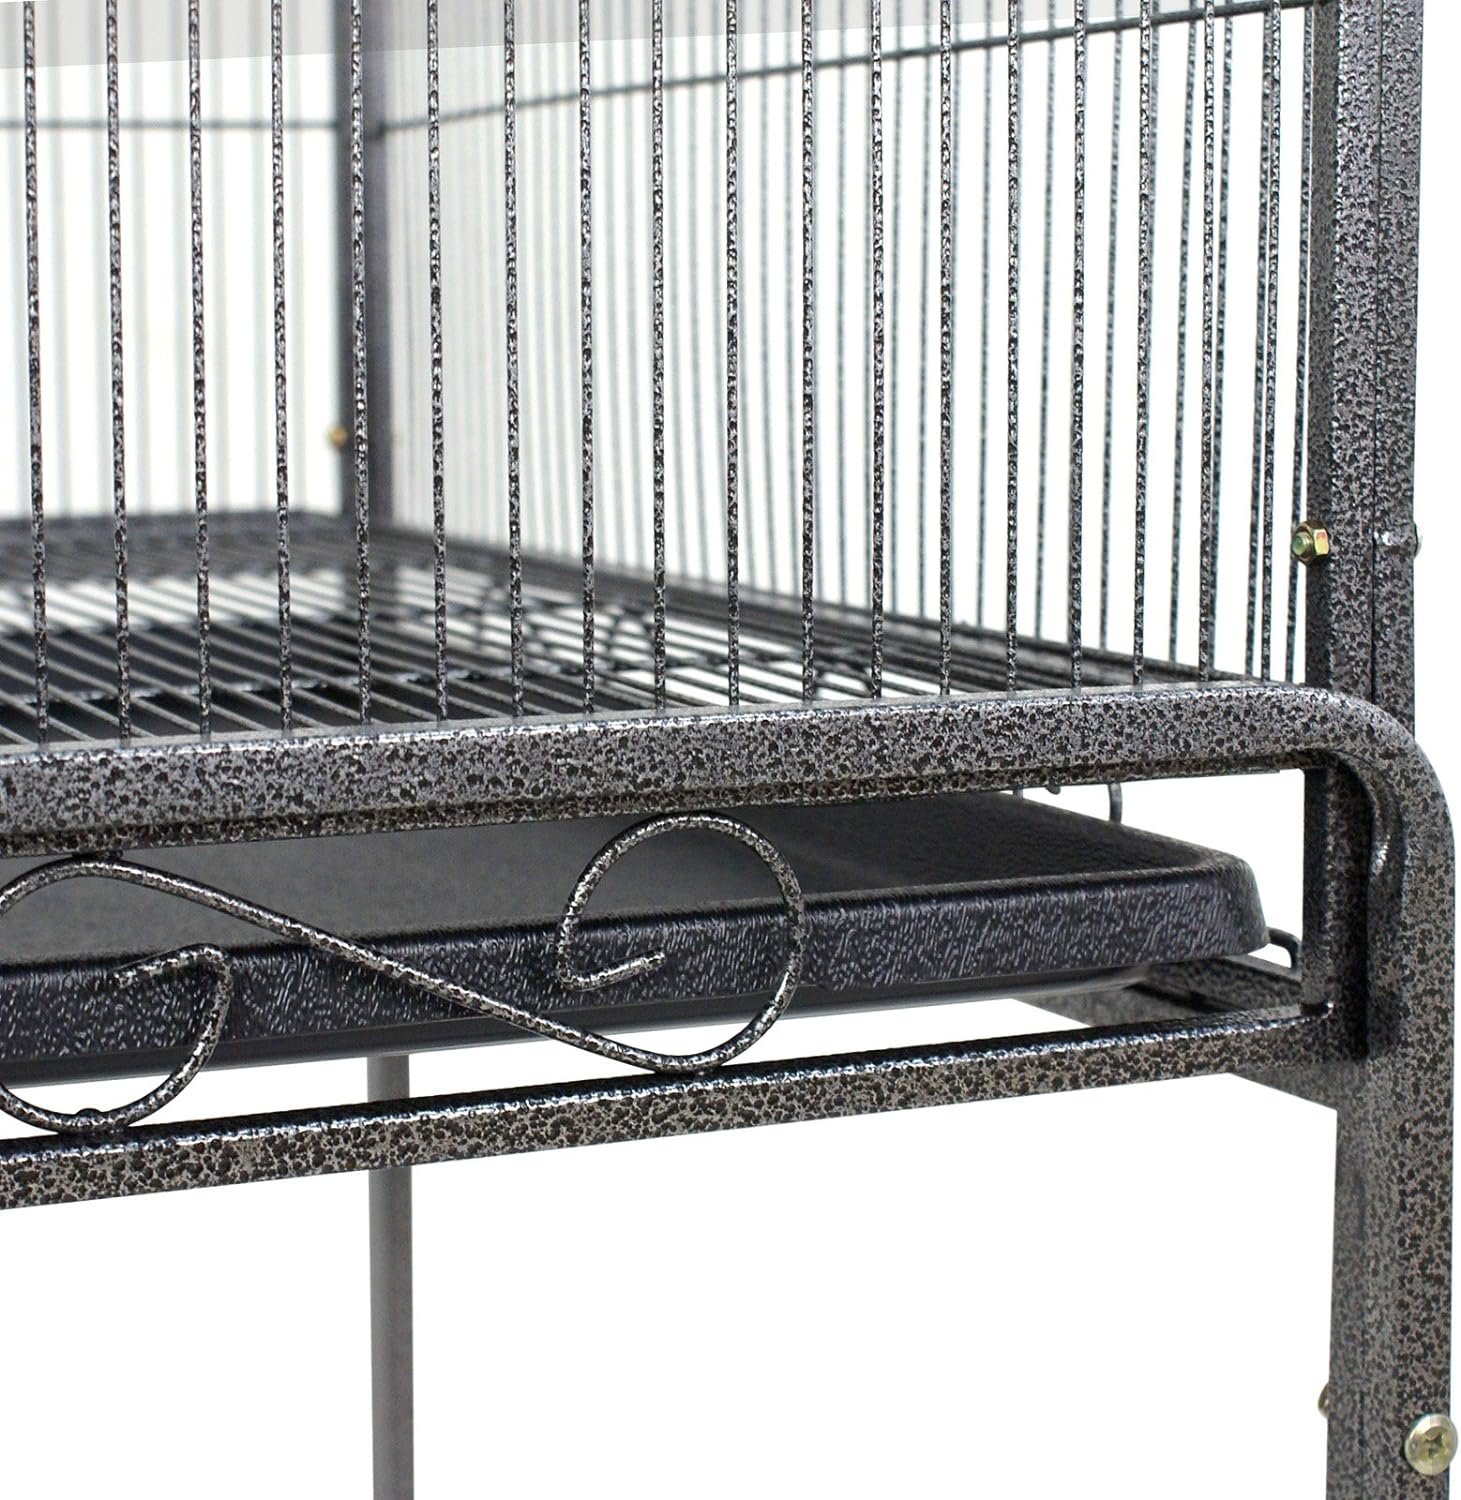 SUPER DEAL 53-Inch Rolling Bird Cage Large Wrought Iron Cage for Cockatiel Sun Conure Parakeet Finch Budgie Lovebird Canary Medium Pet House with Rolling Stand  Storage Shelf